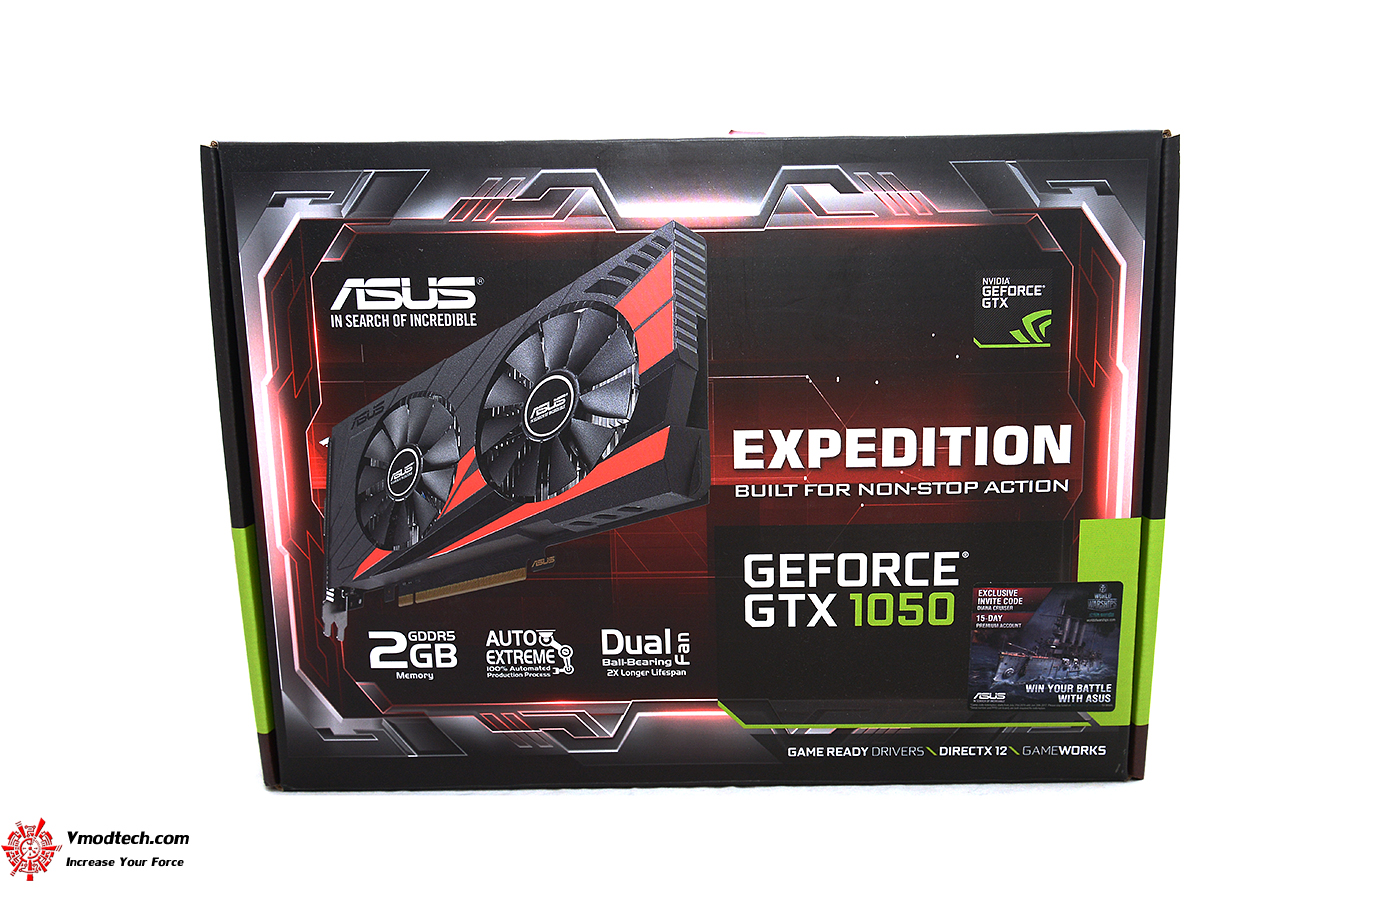 dsc 8765 ASUS EXPEDITION GeForce GTX 1050 eSports Gaming Graphics Card 2GB GDDR5 Review